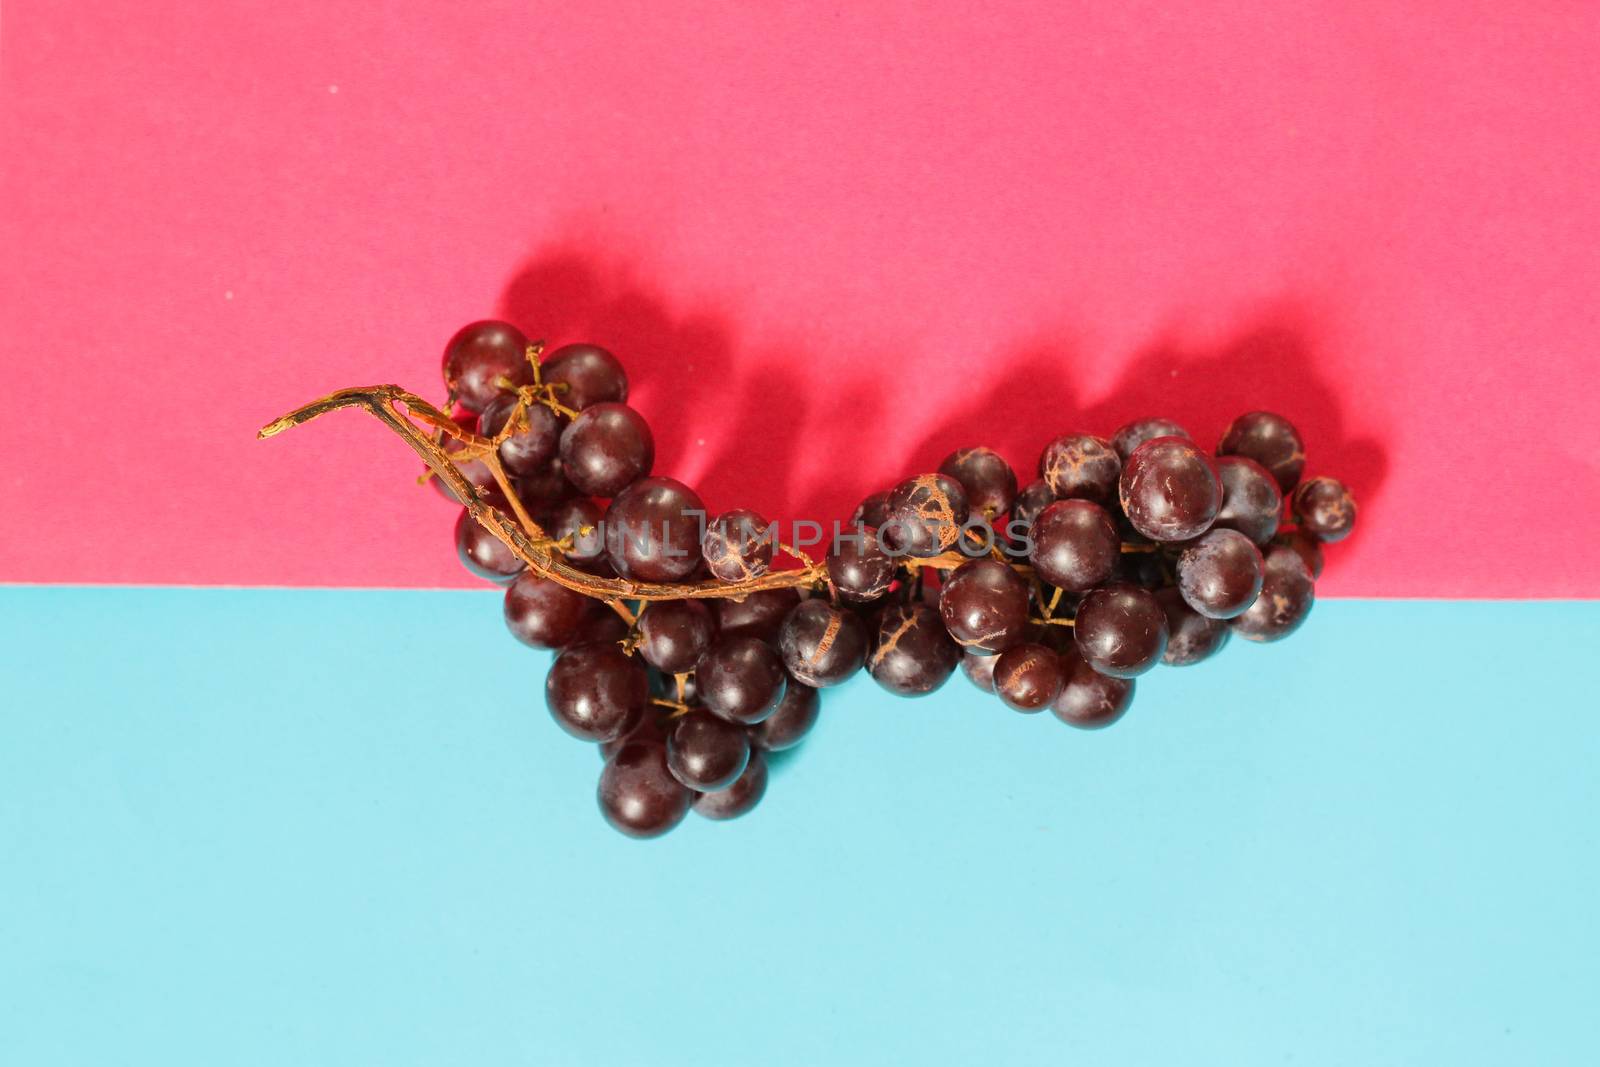 Red grapes against vibrantly colored pink and blue background by Sonnet15